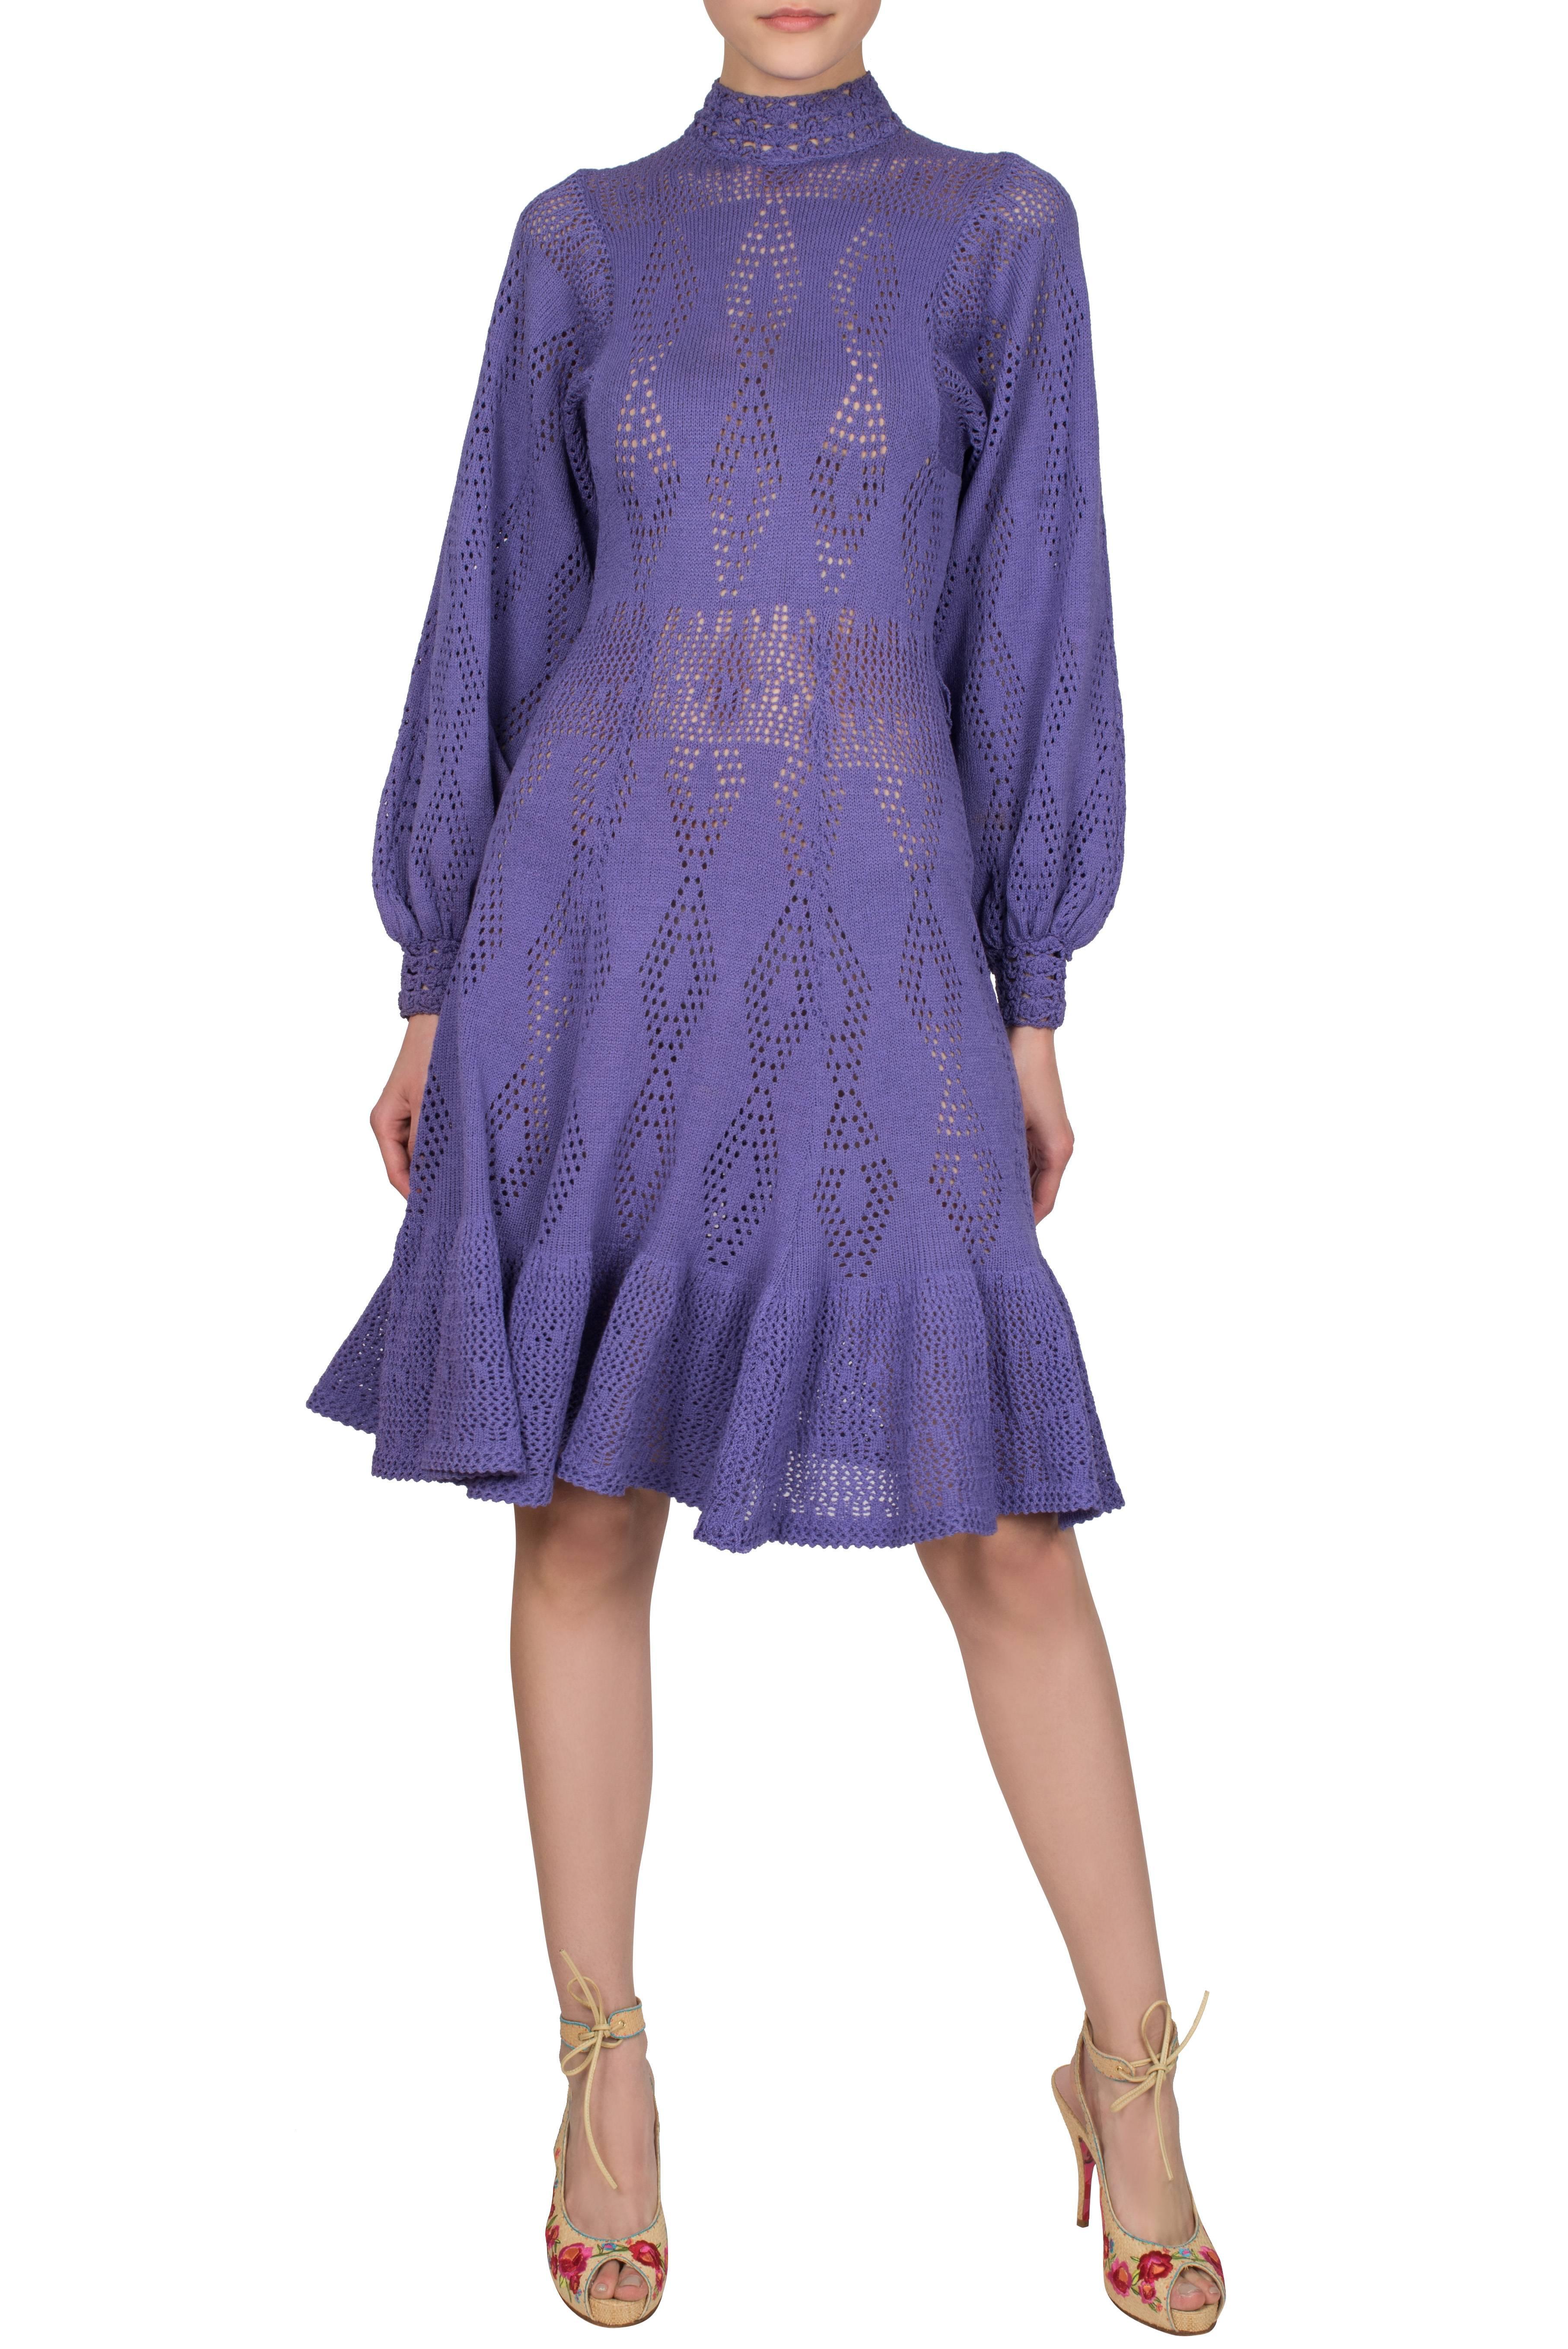 An incredibly feminine 1970's dress from St John. Made from a soft lilac crochet knit, the dress features bishop sleeves and a godet skirt. There are no seams attaching the sleeves to the bodice, with the cuffs and high collar being made from